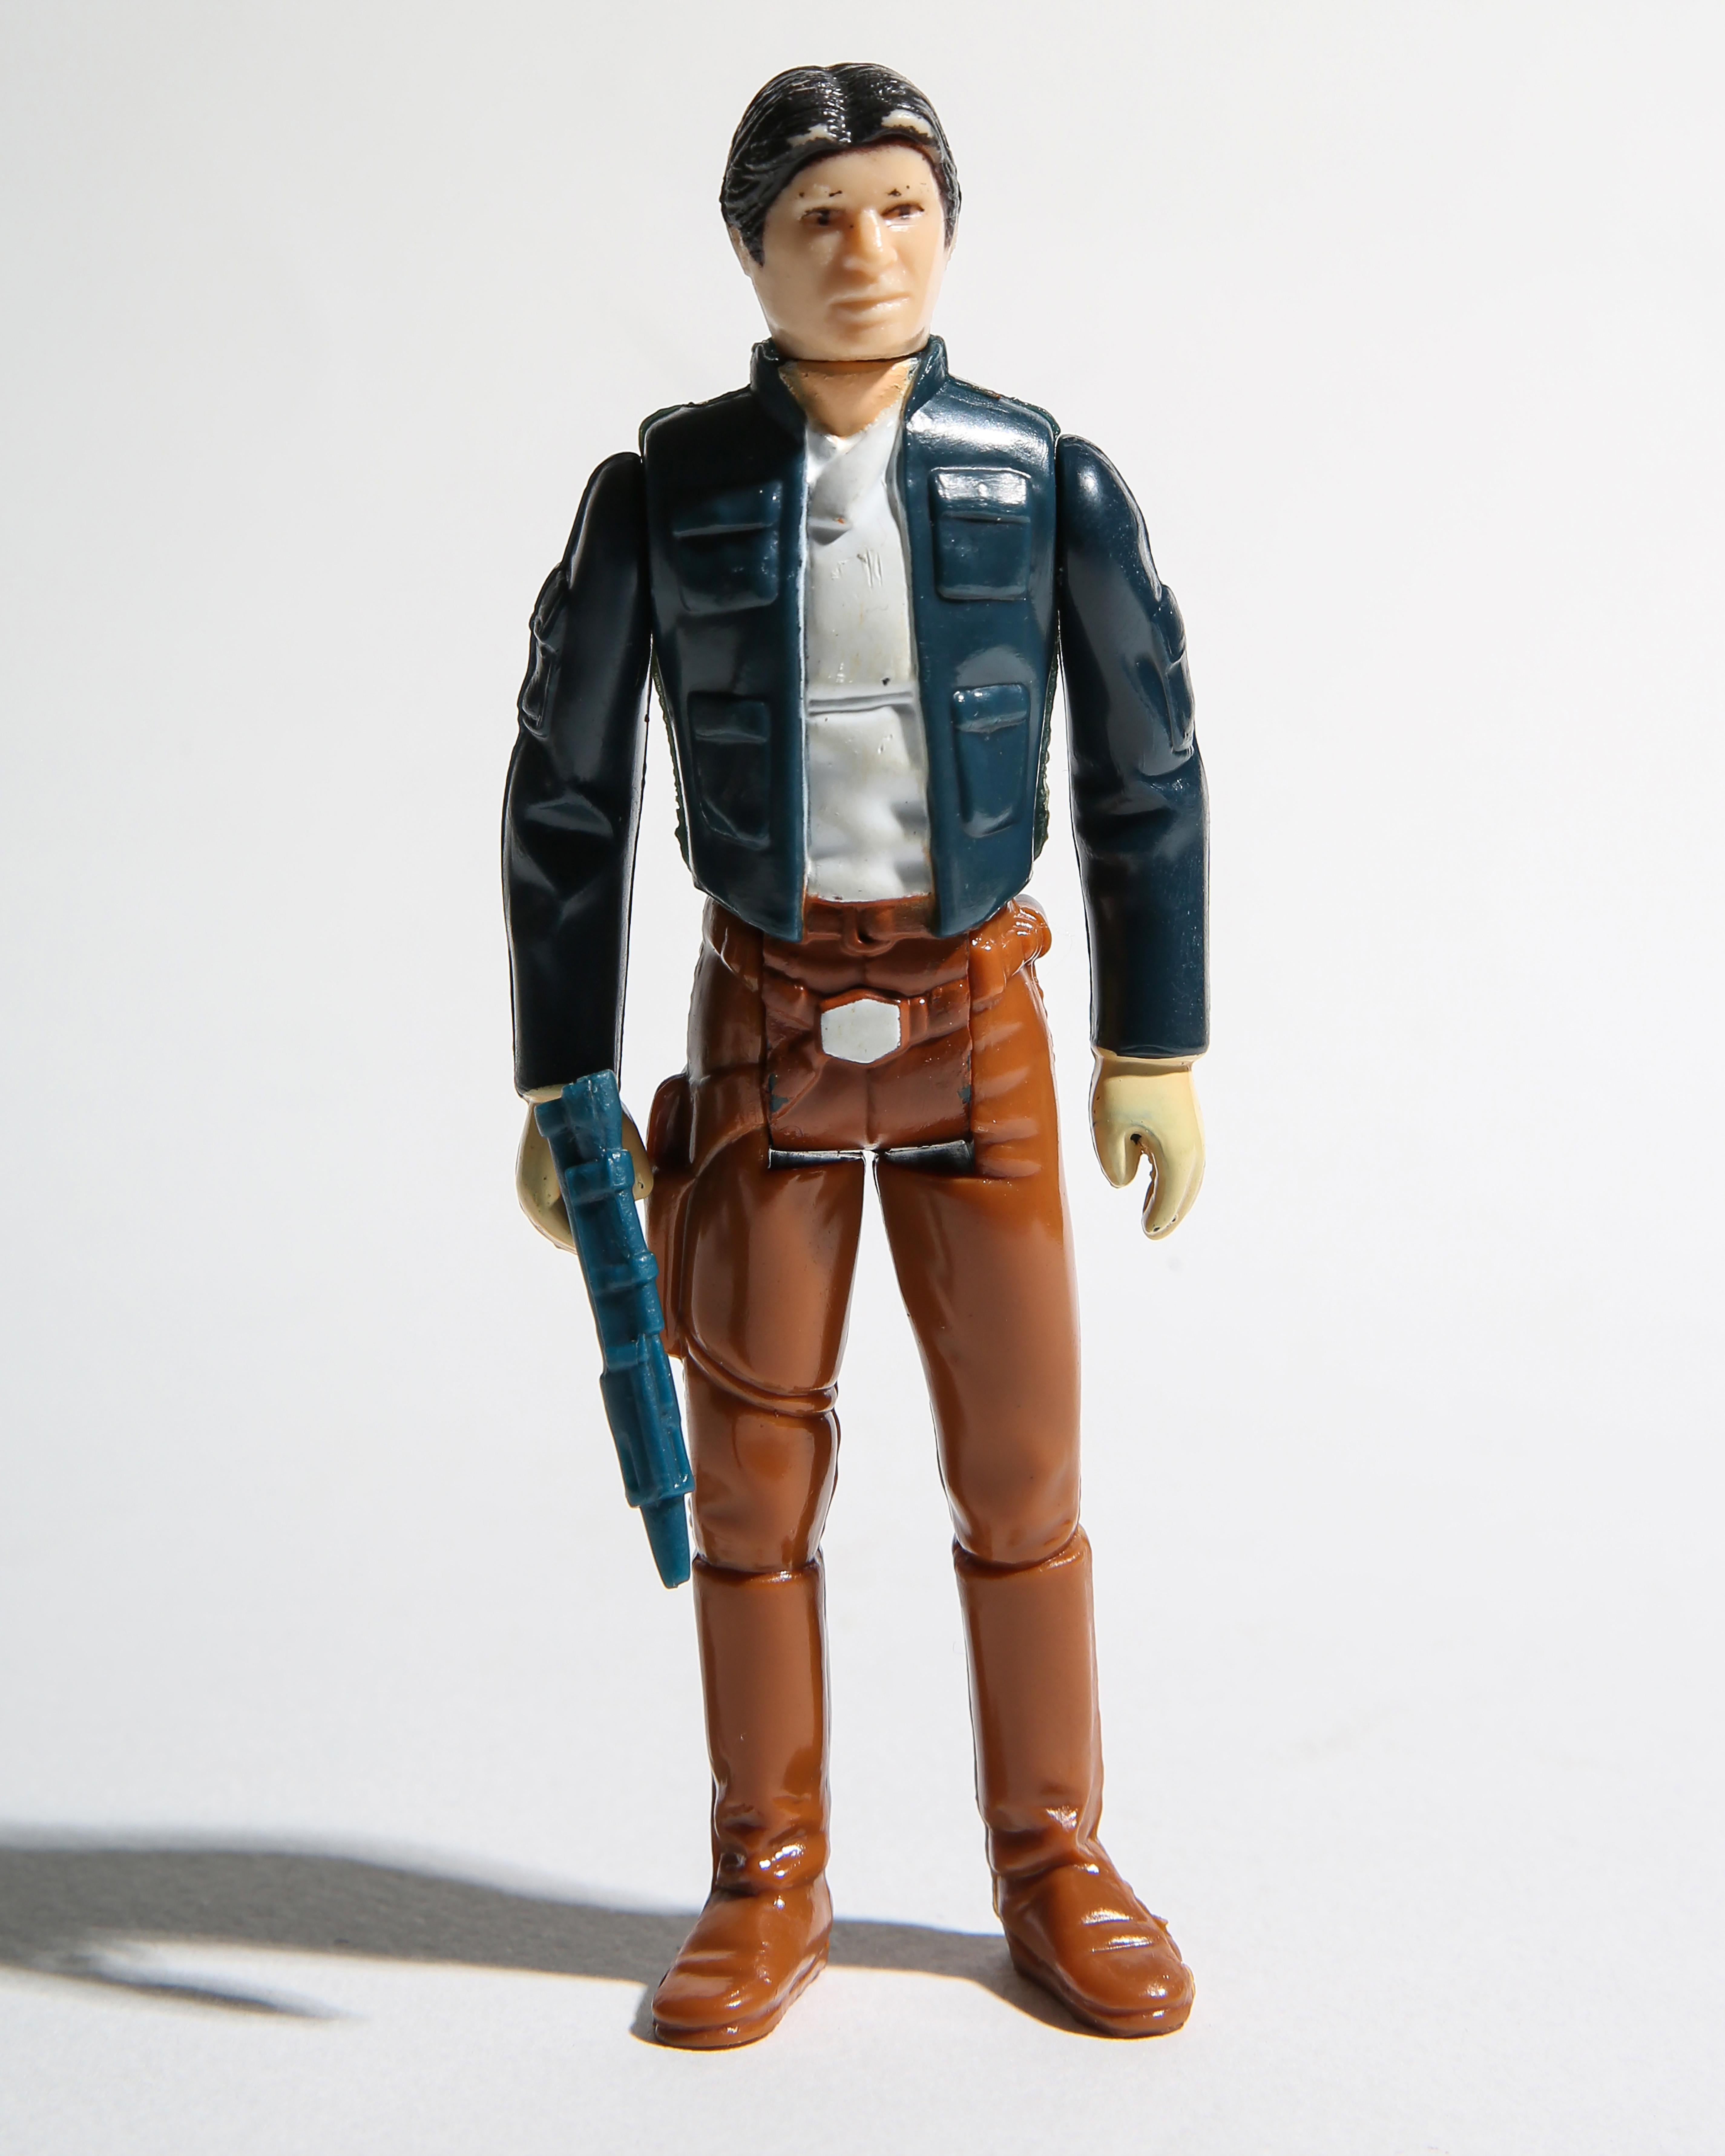 han solo toy